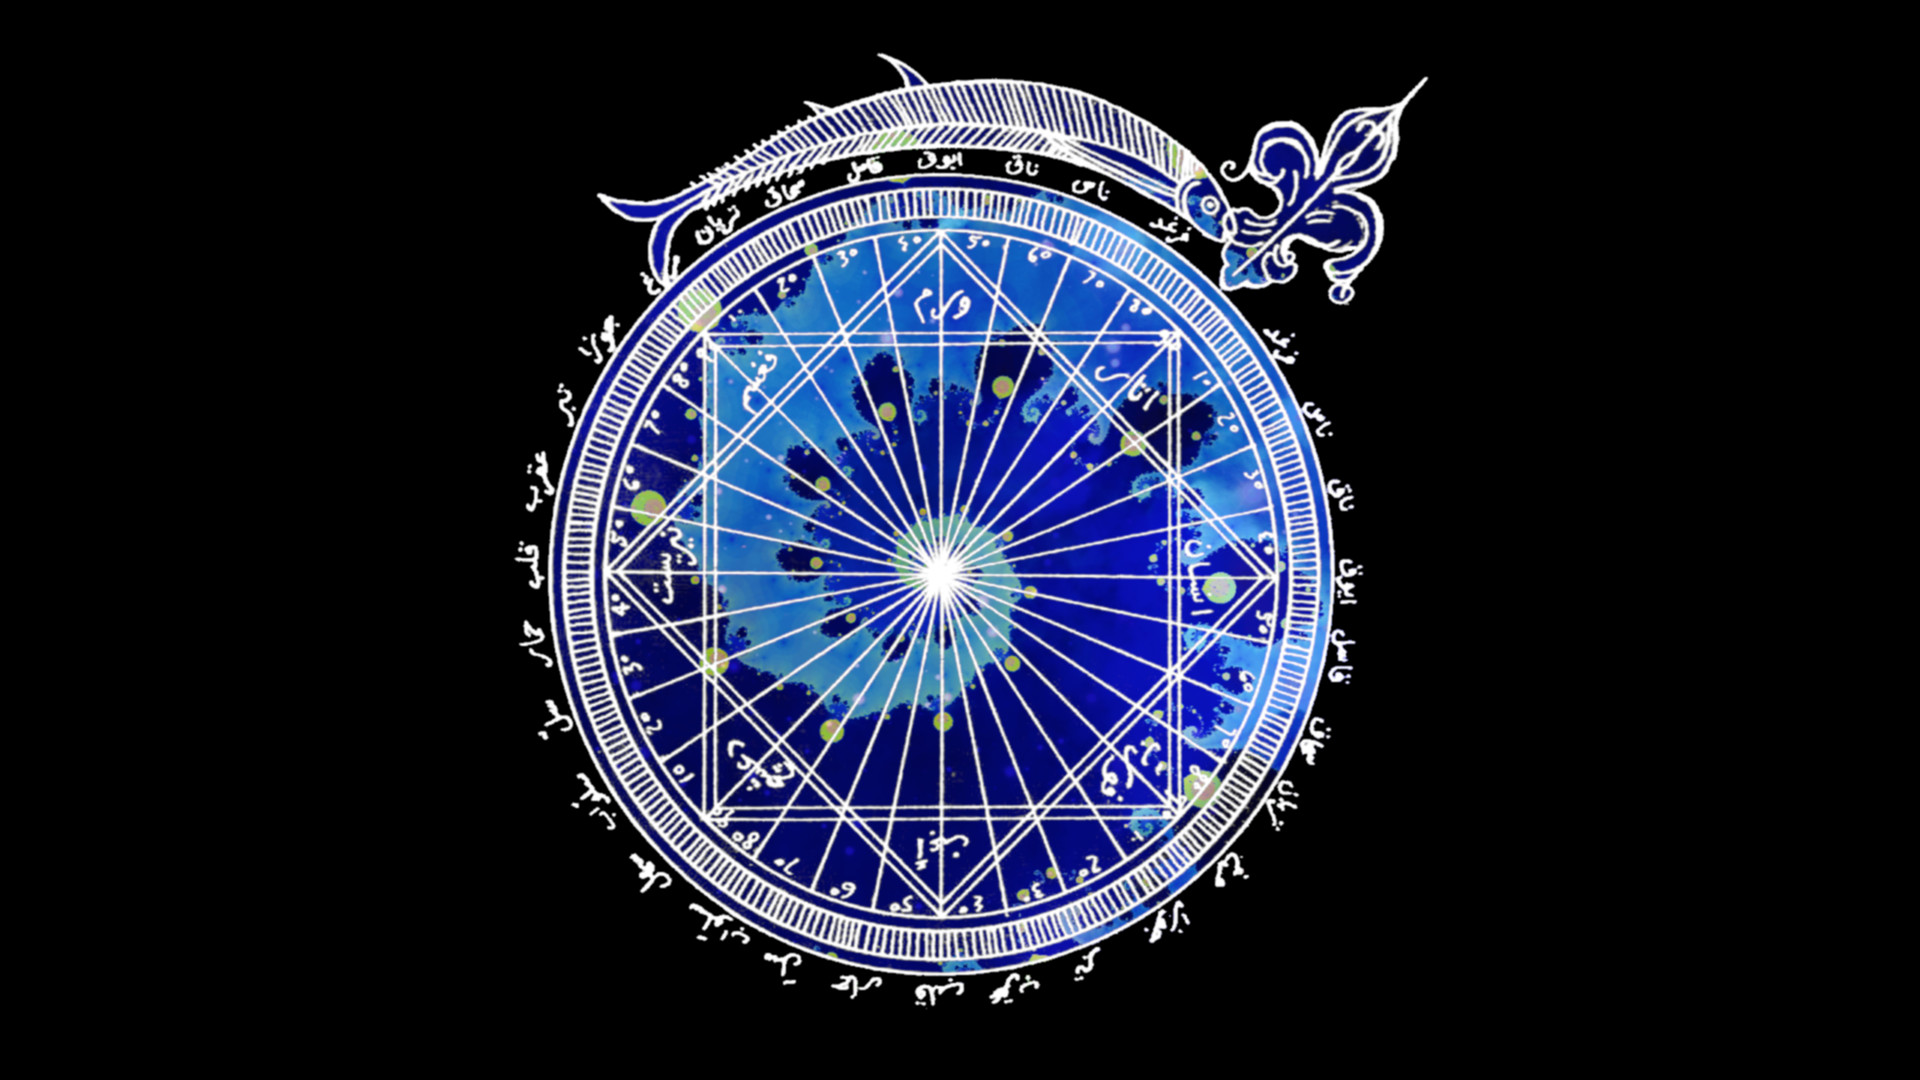 Astrology background Stock Photos, Royalty Free Astrology background Images  | Depositphotos